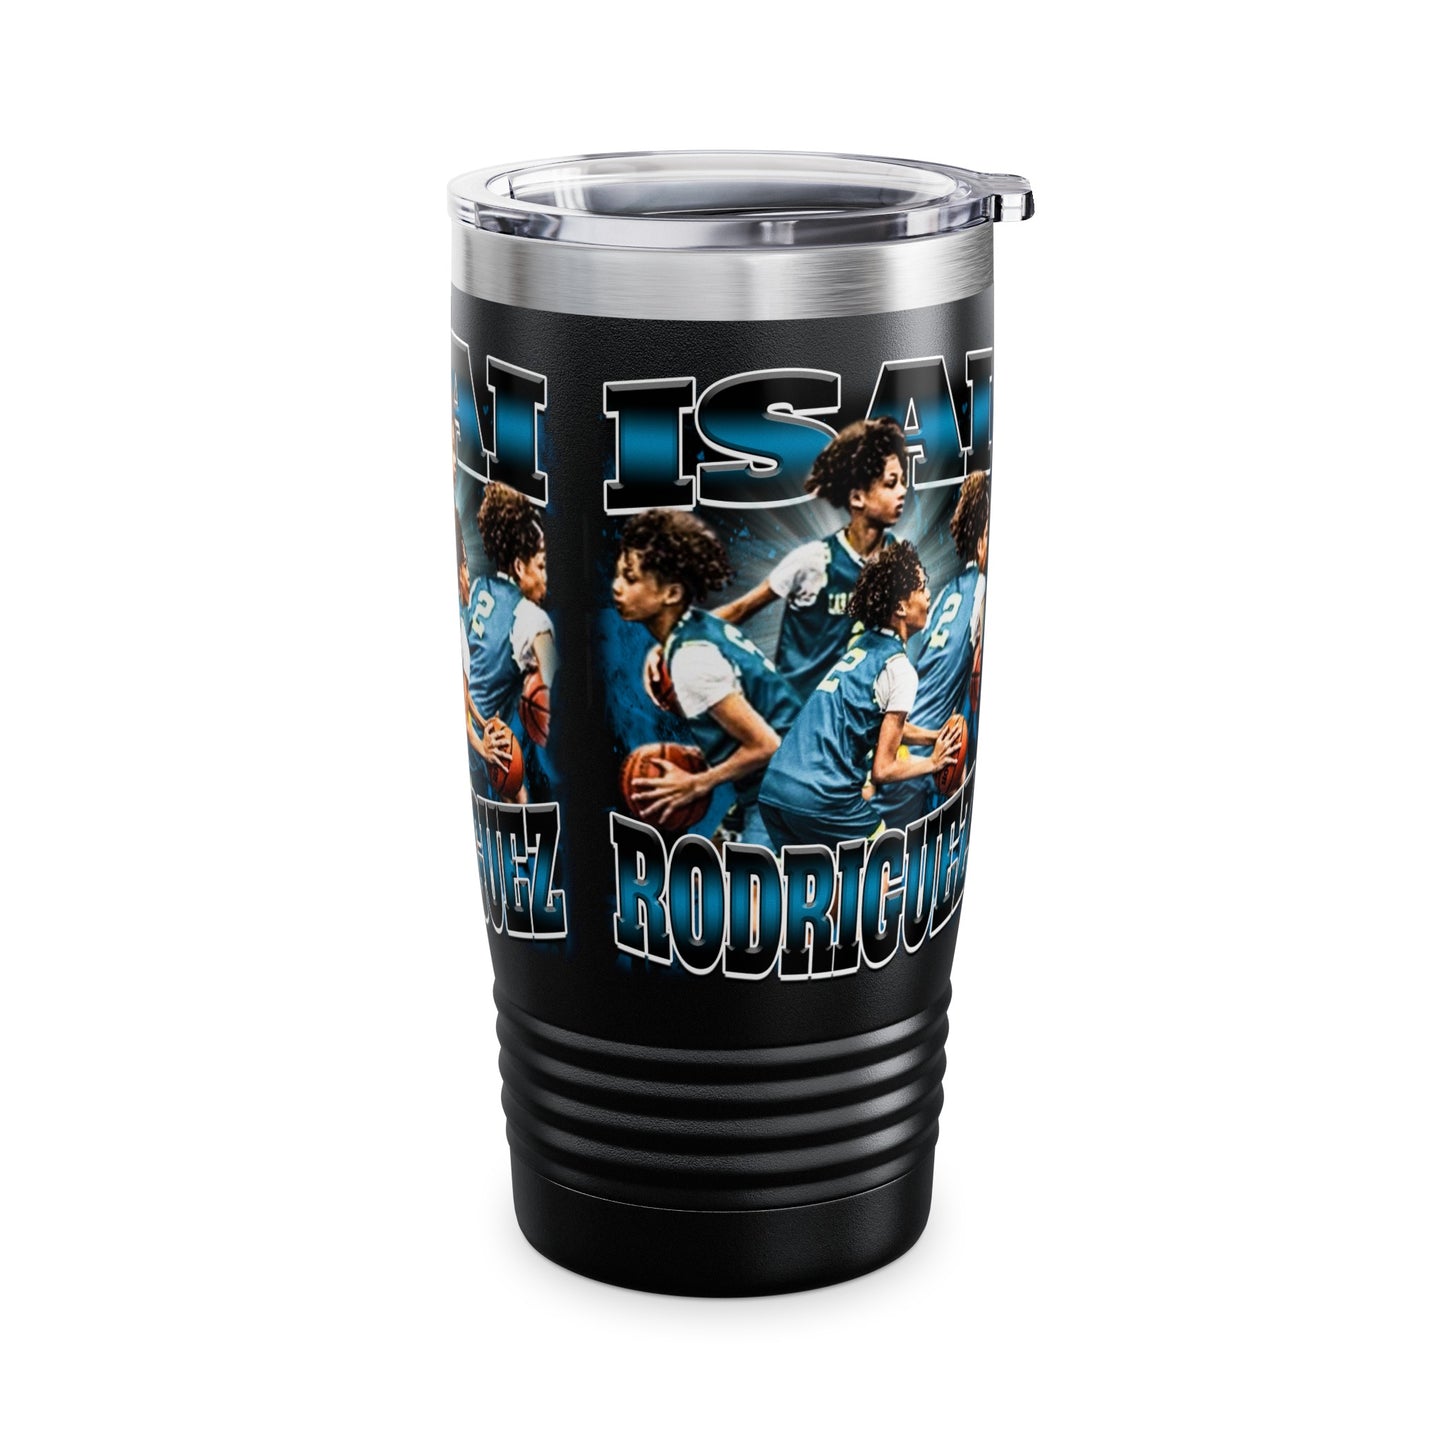 Isai Rodriguez Stainless Steal Tumbler